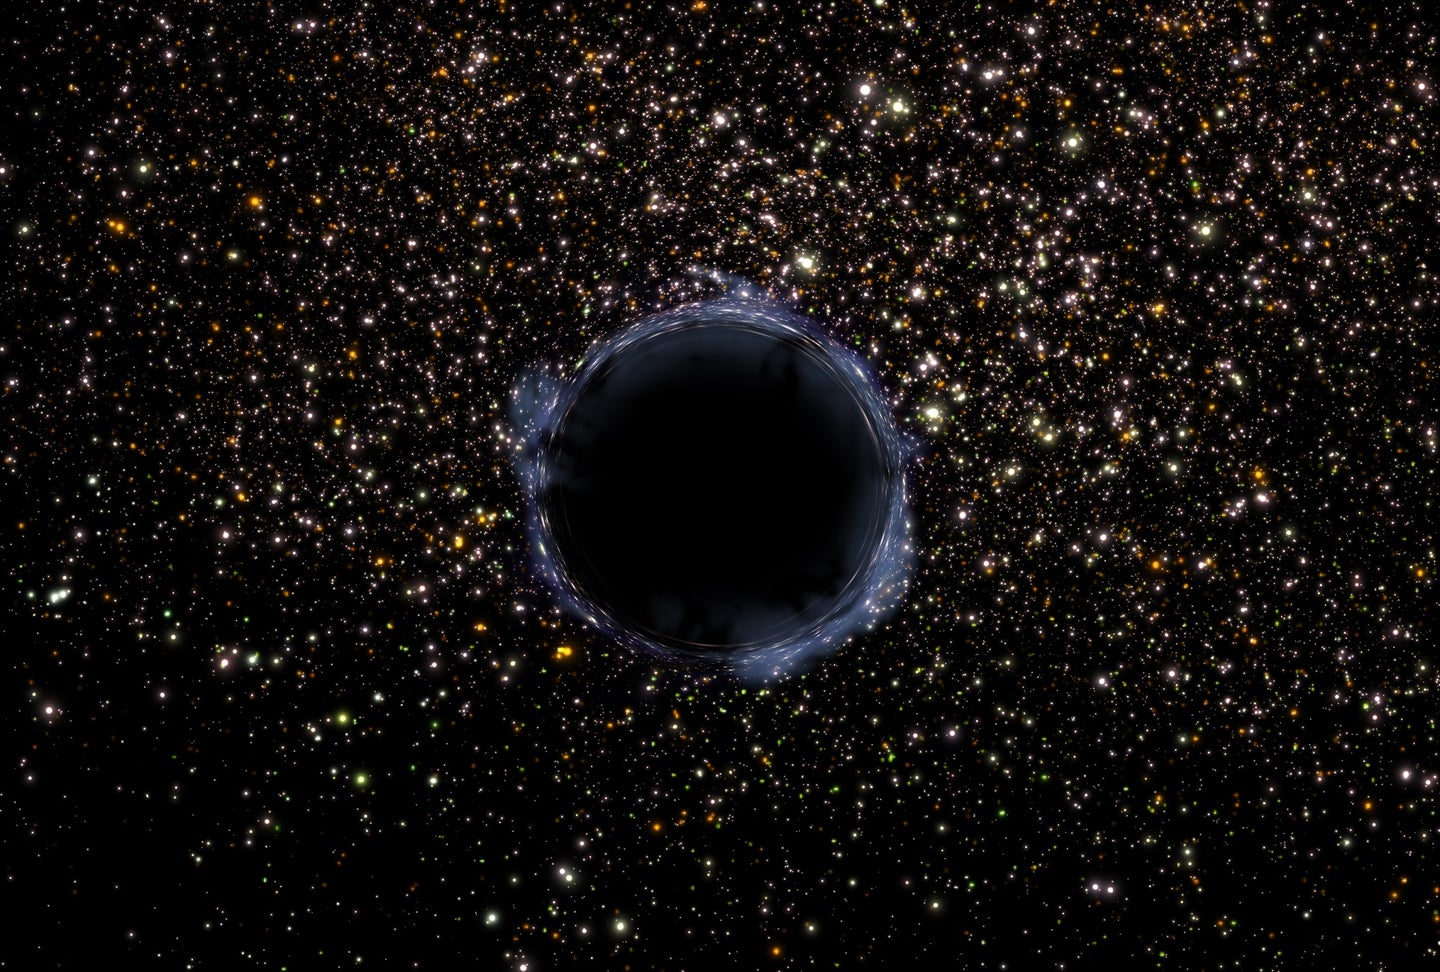 Rogue black hole in Milky Way galaxy in an artist's rendition